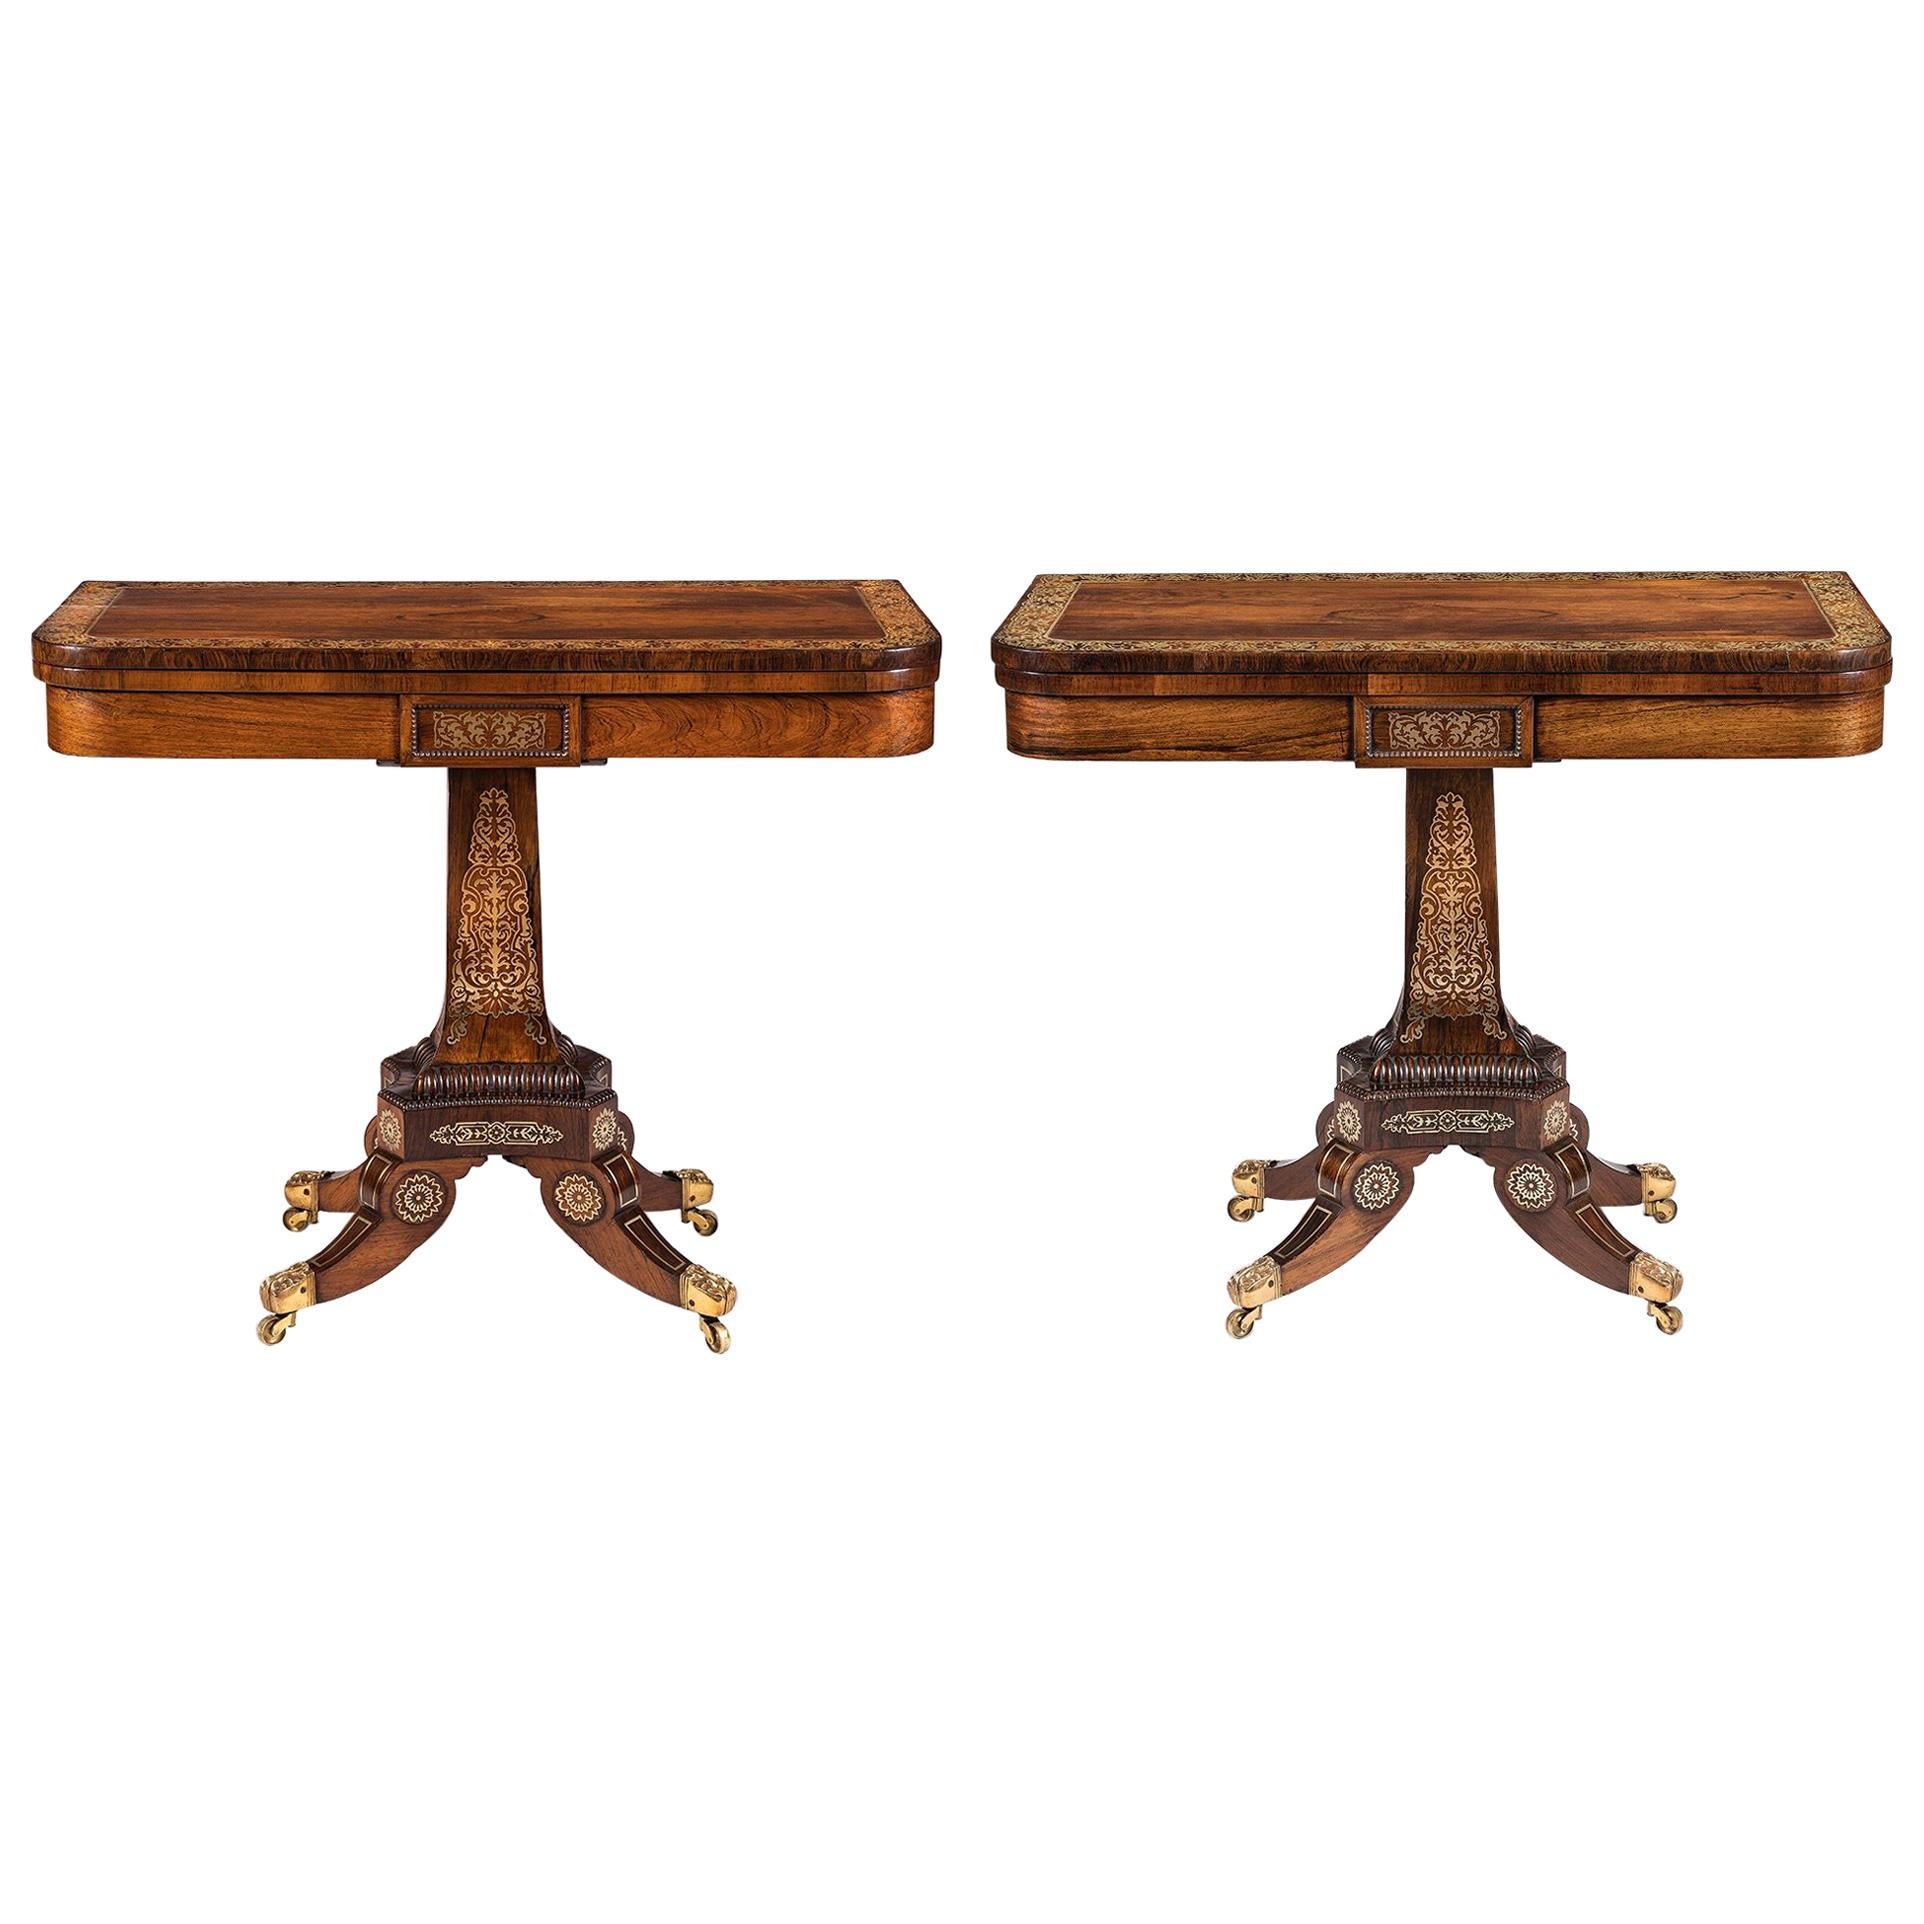 Pair of 19th Century English Regency Gonçalo Alves Card Tables with Brass Inlay